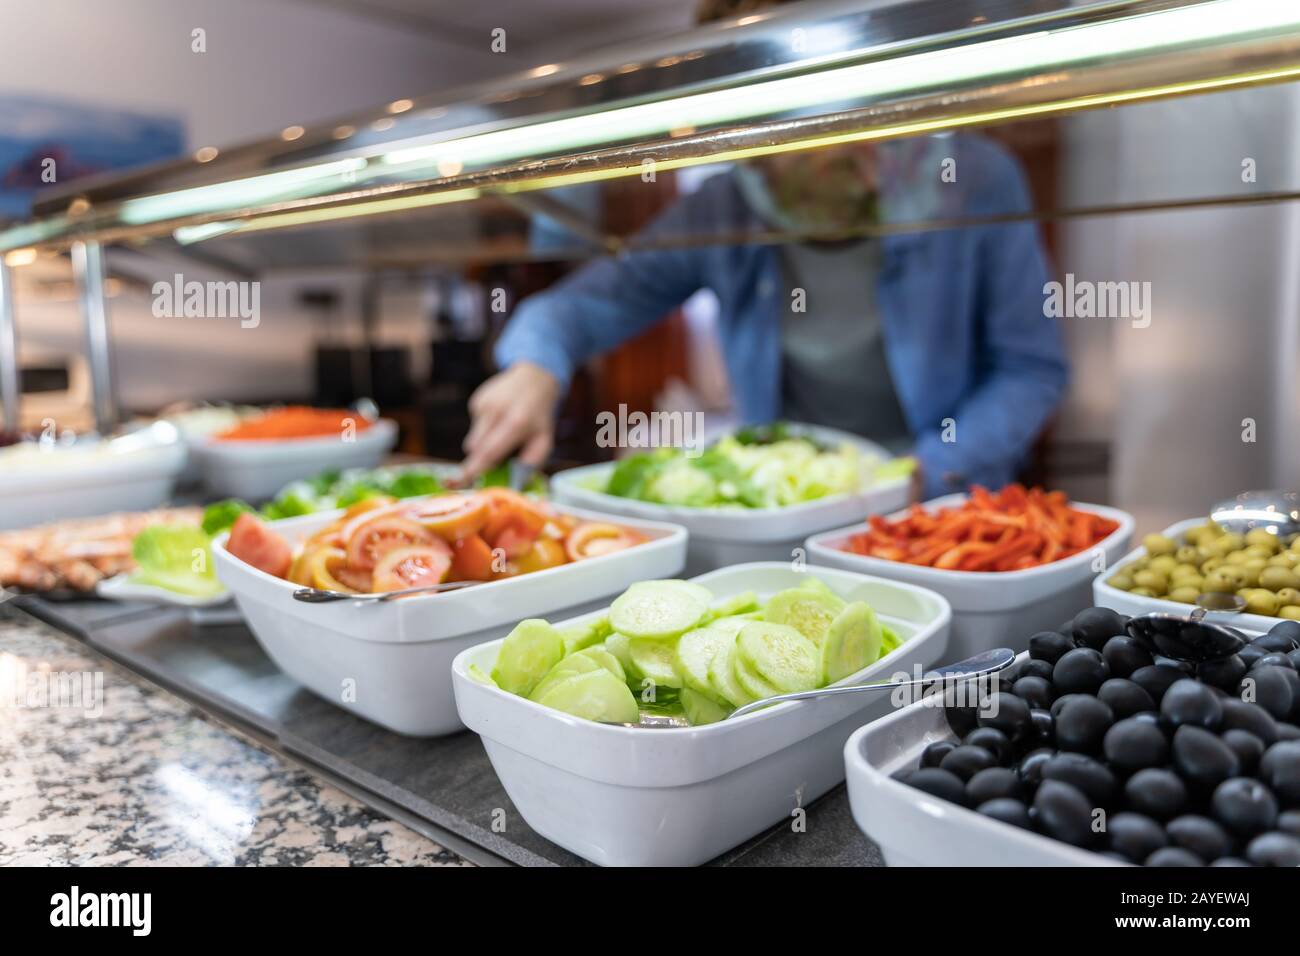 Stock photo of plates of healthy food, olives and salad and an unfocused background man picking up food. Lifestyle Stock Photo